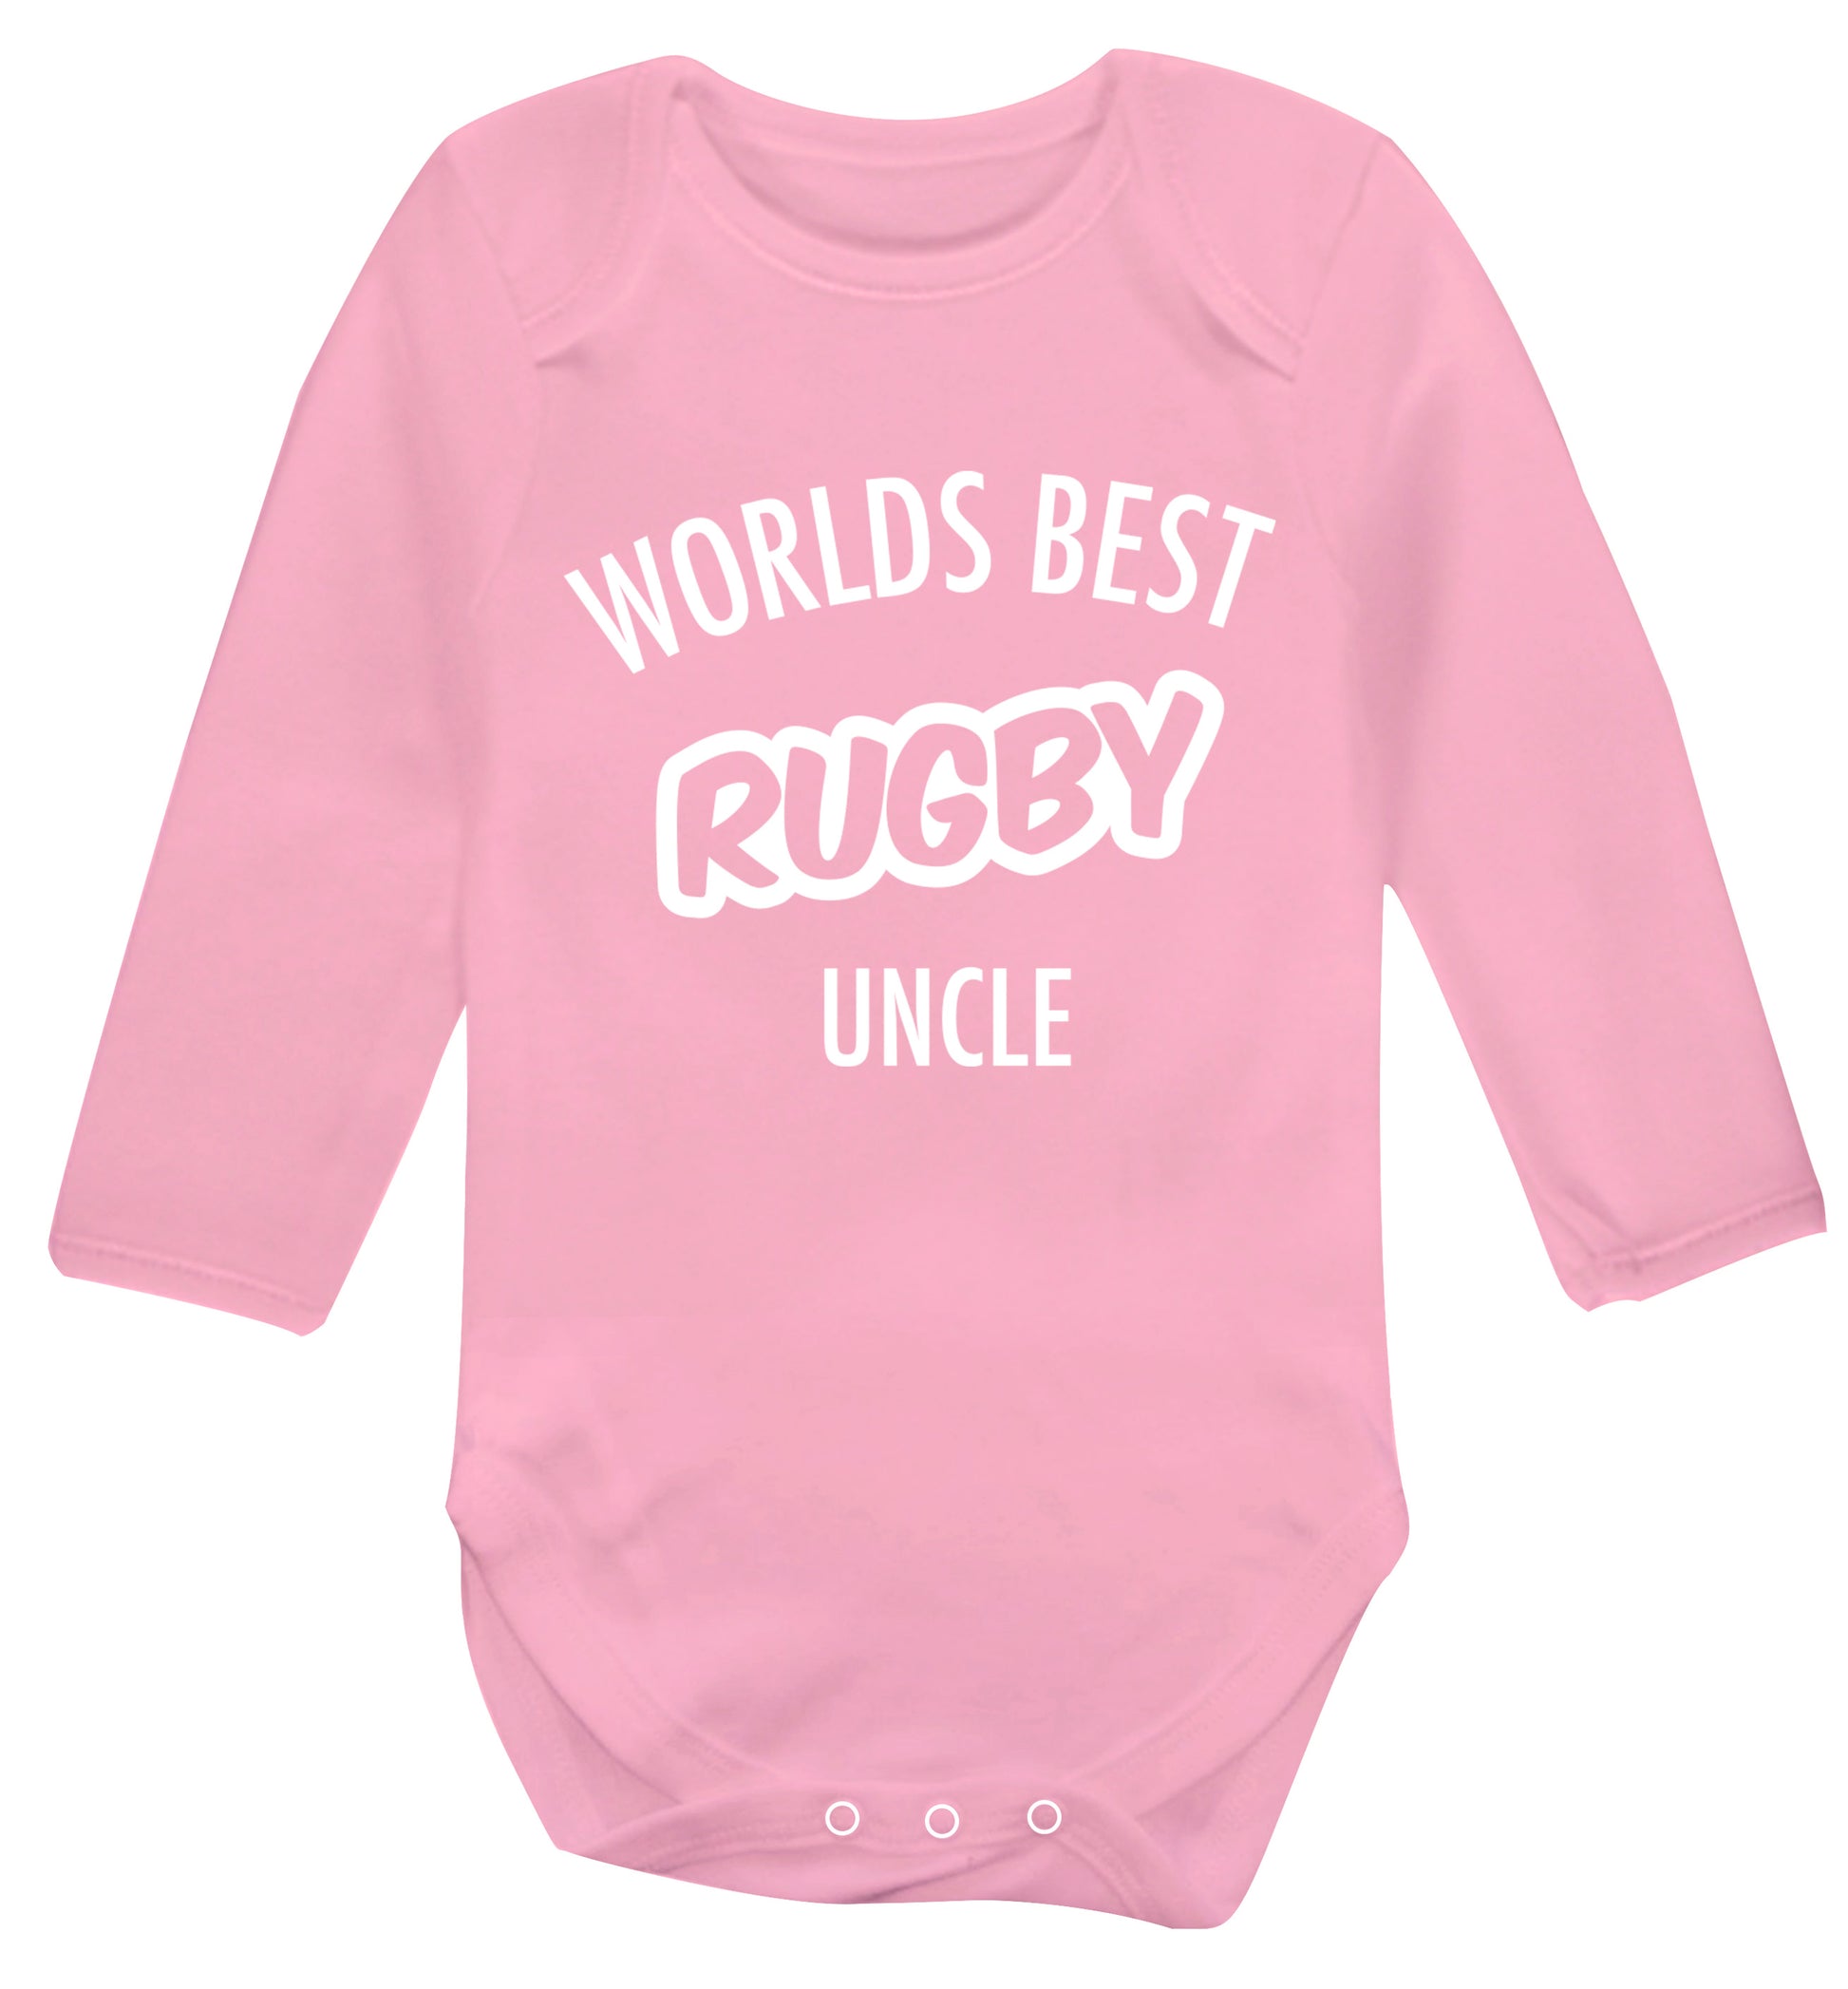 Worlds best rugby uncle Baby Vest long sleeved pale pink 6-12 months